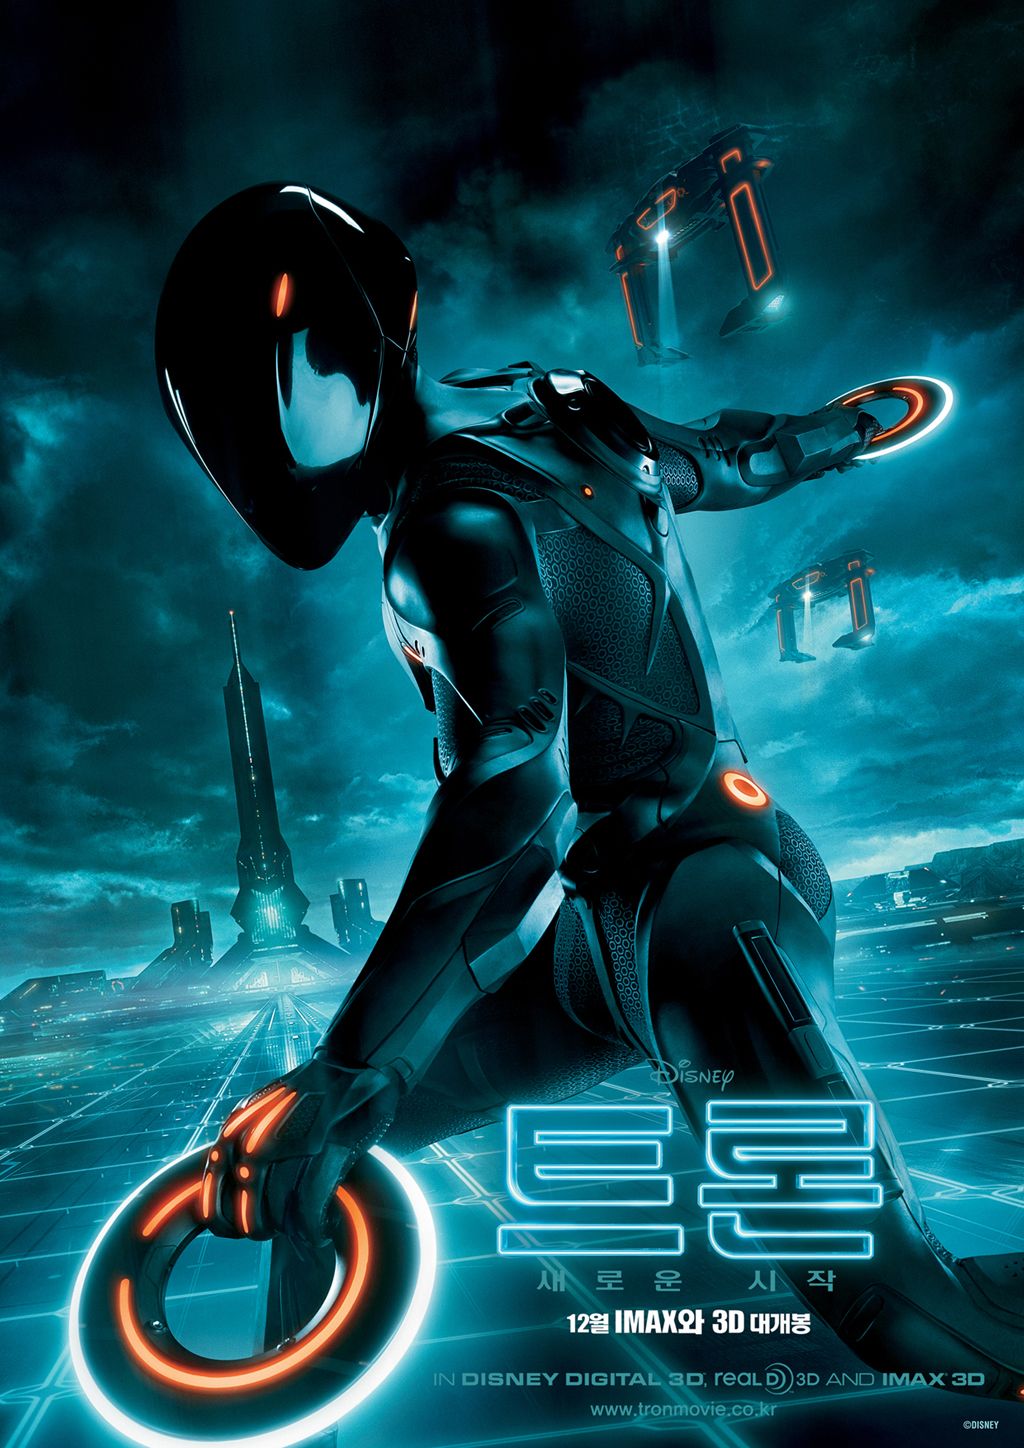 Extra Large Movie Poster Image for Tron Legacy (#16 of 26)